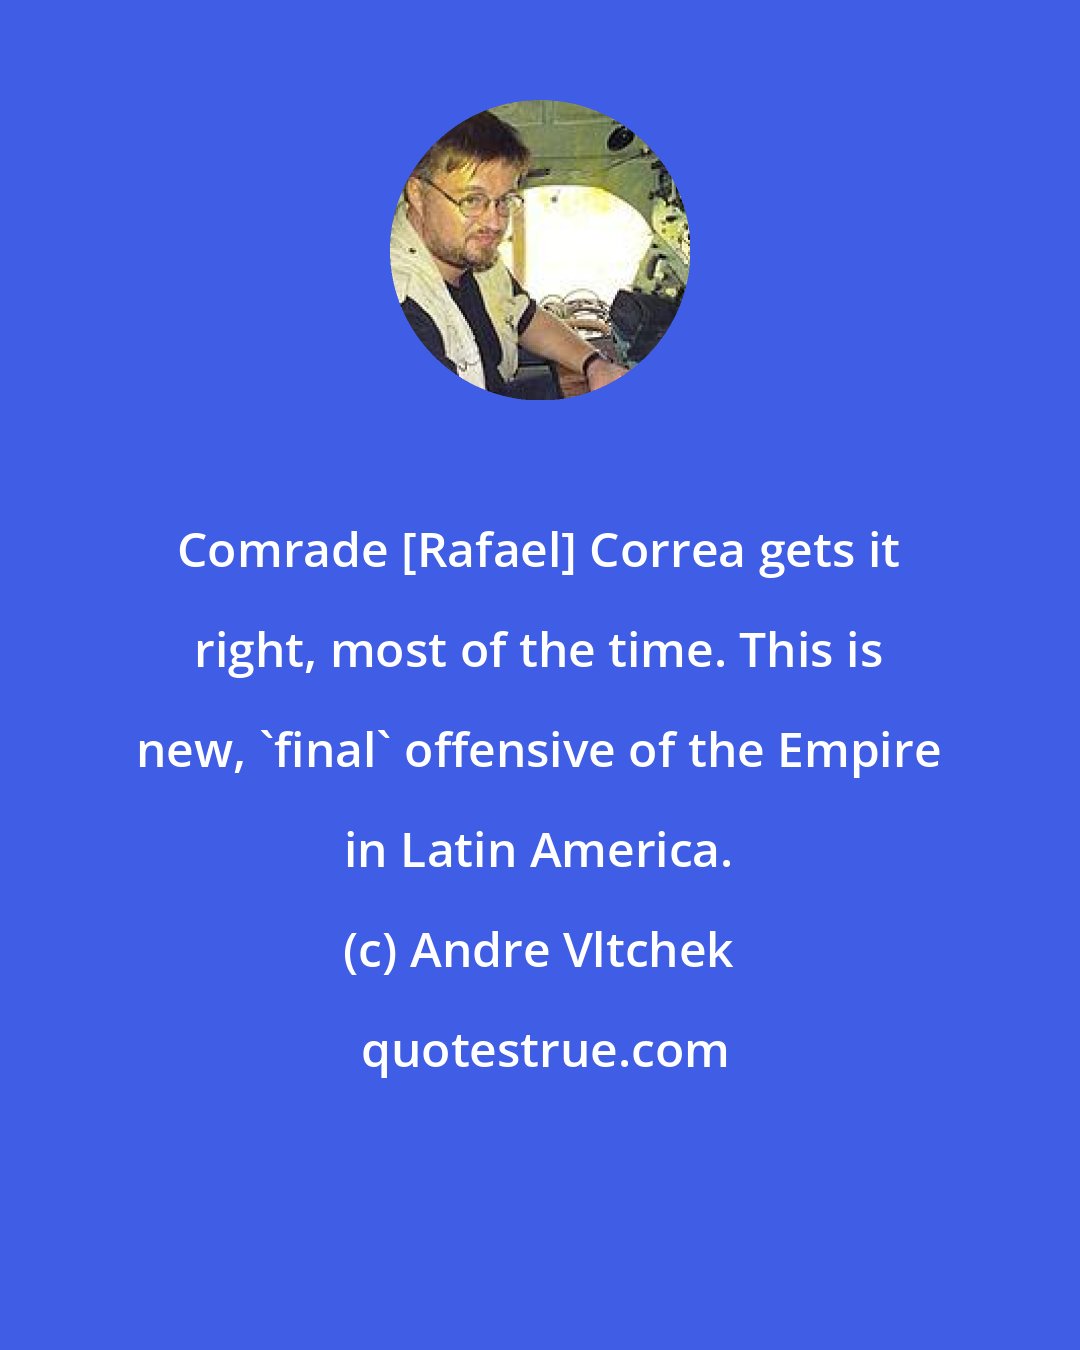 Andre Vltchek: Comrade [Rafael] Correa gets it right, most of the time. This is new, 'final' offensive of the Empire in Latin America.